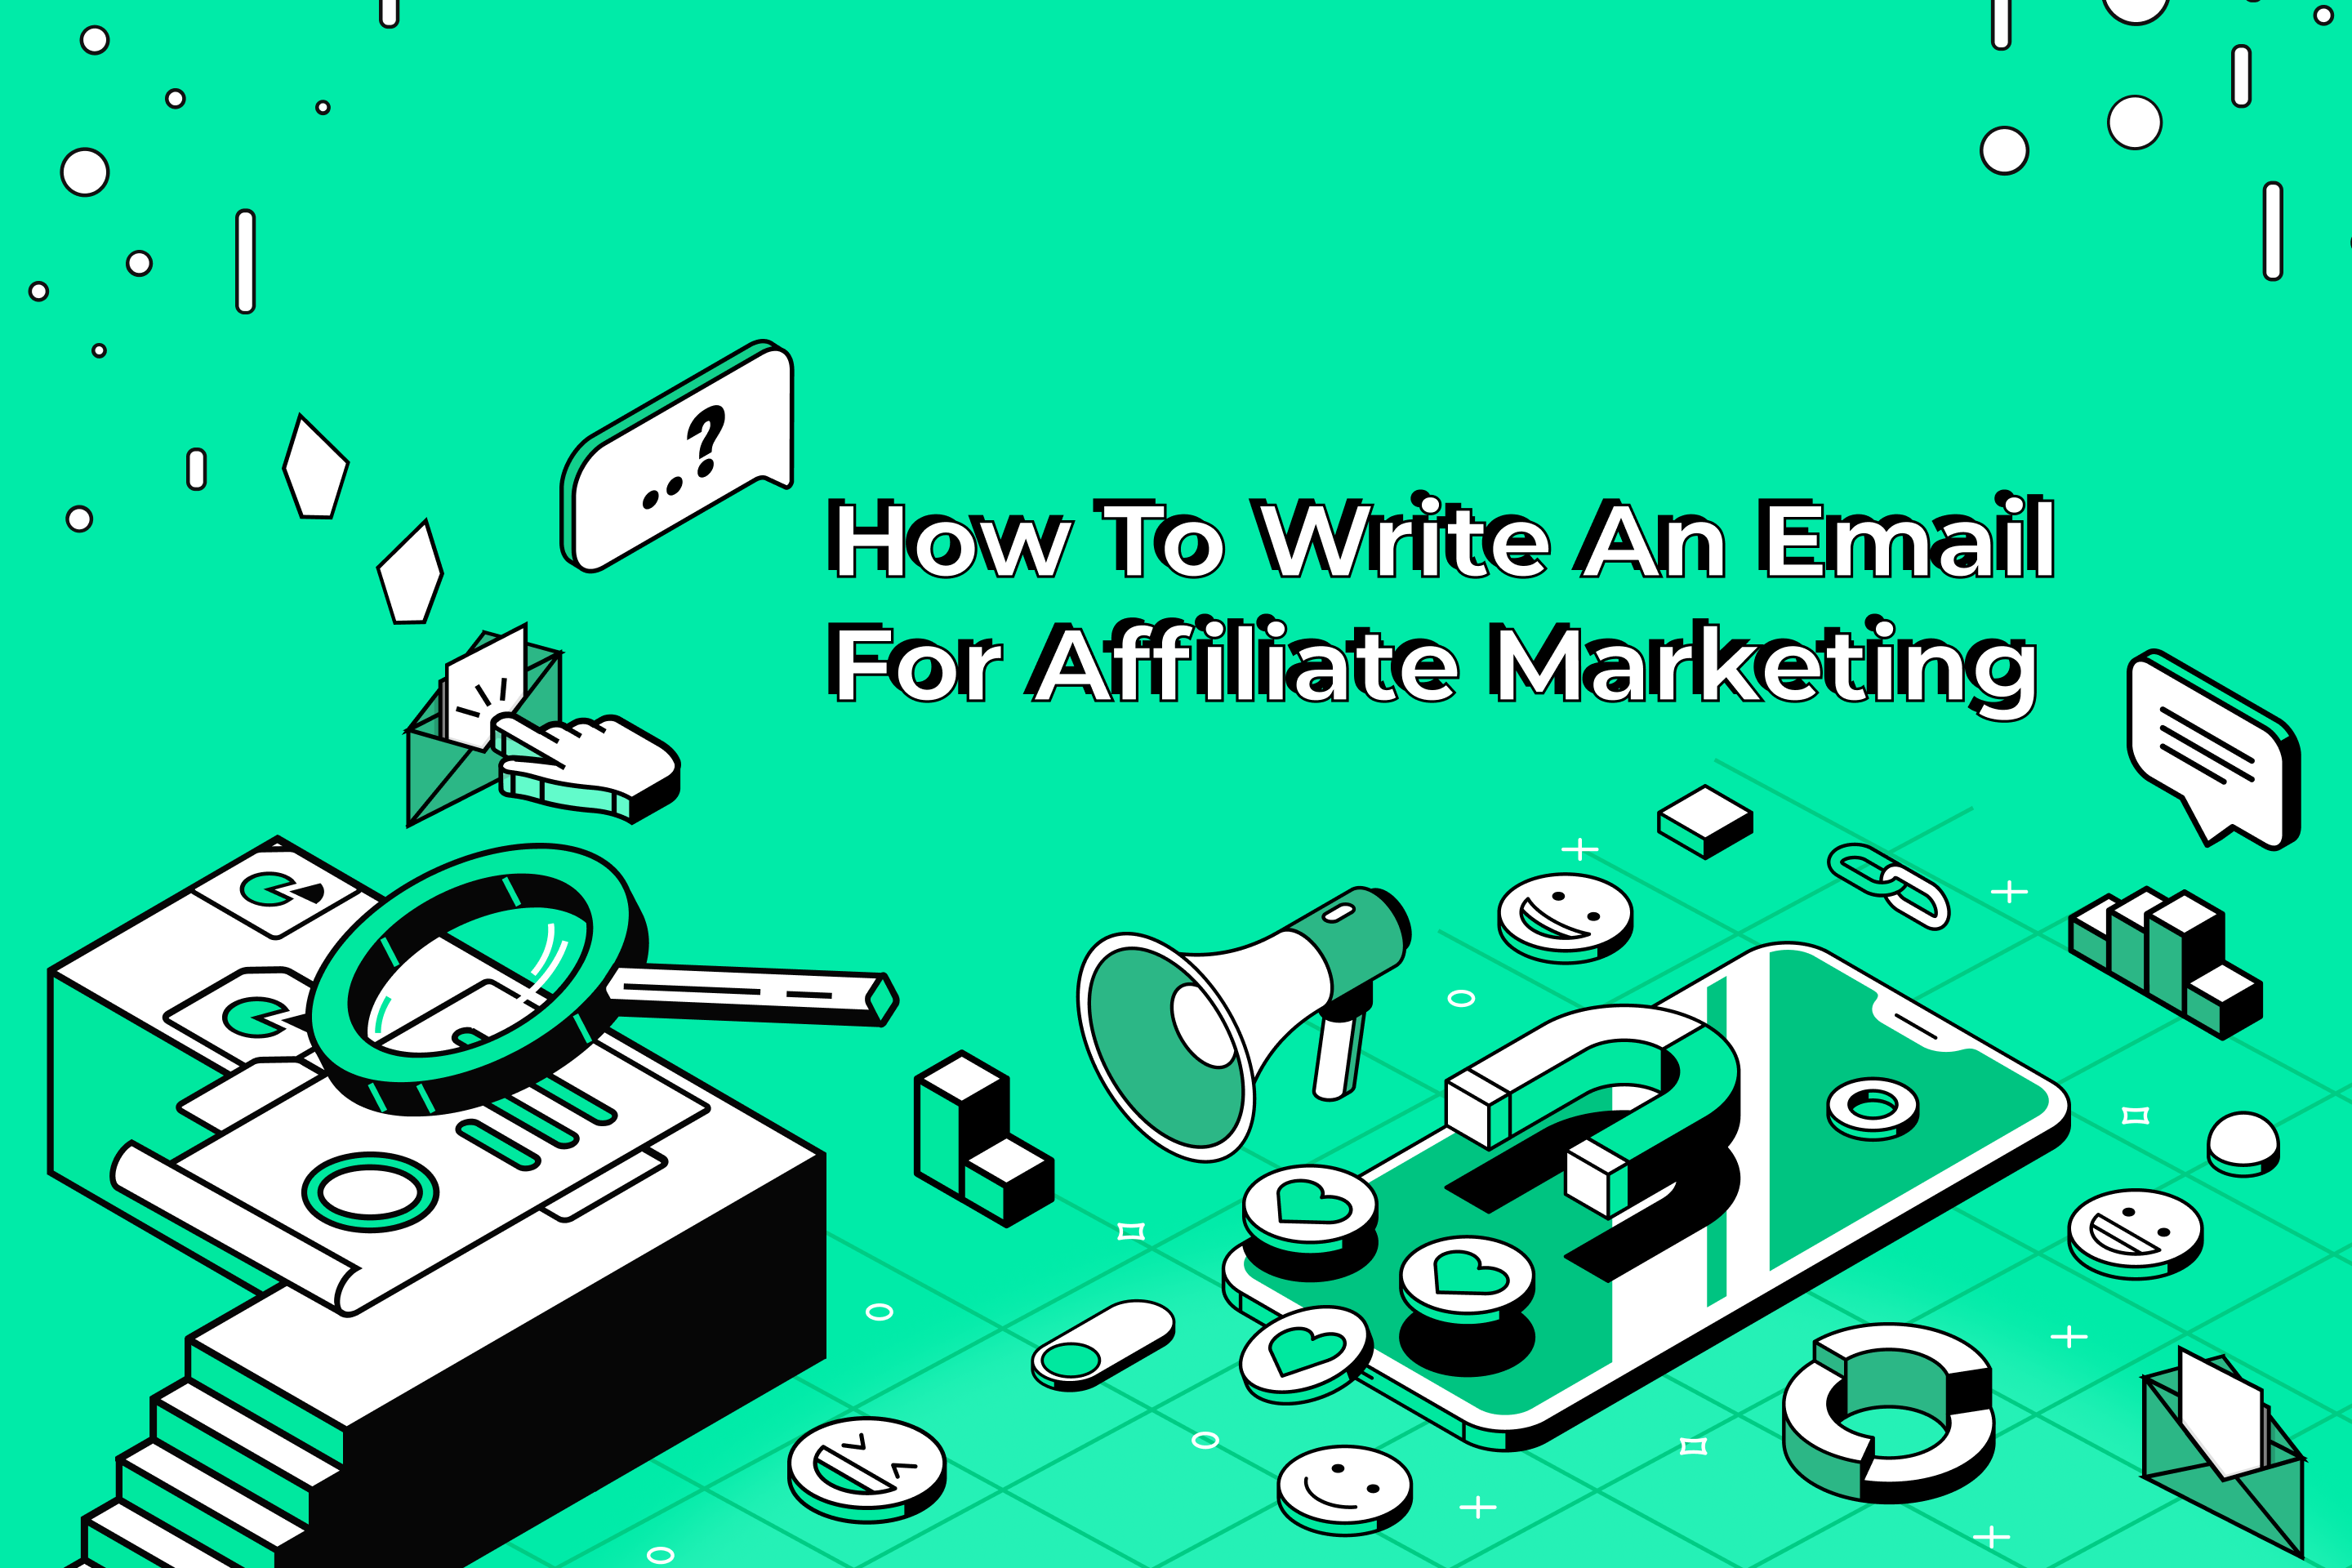 How-To-Write-an-Email-for-Affiliate-Marketing